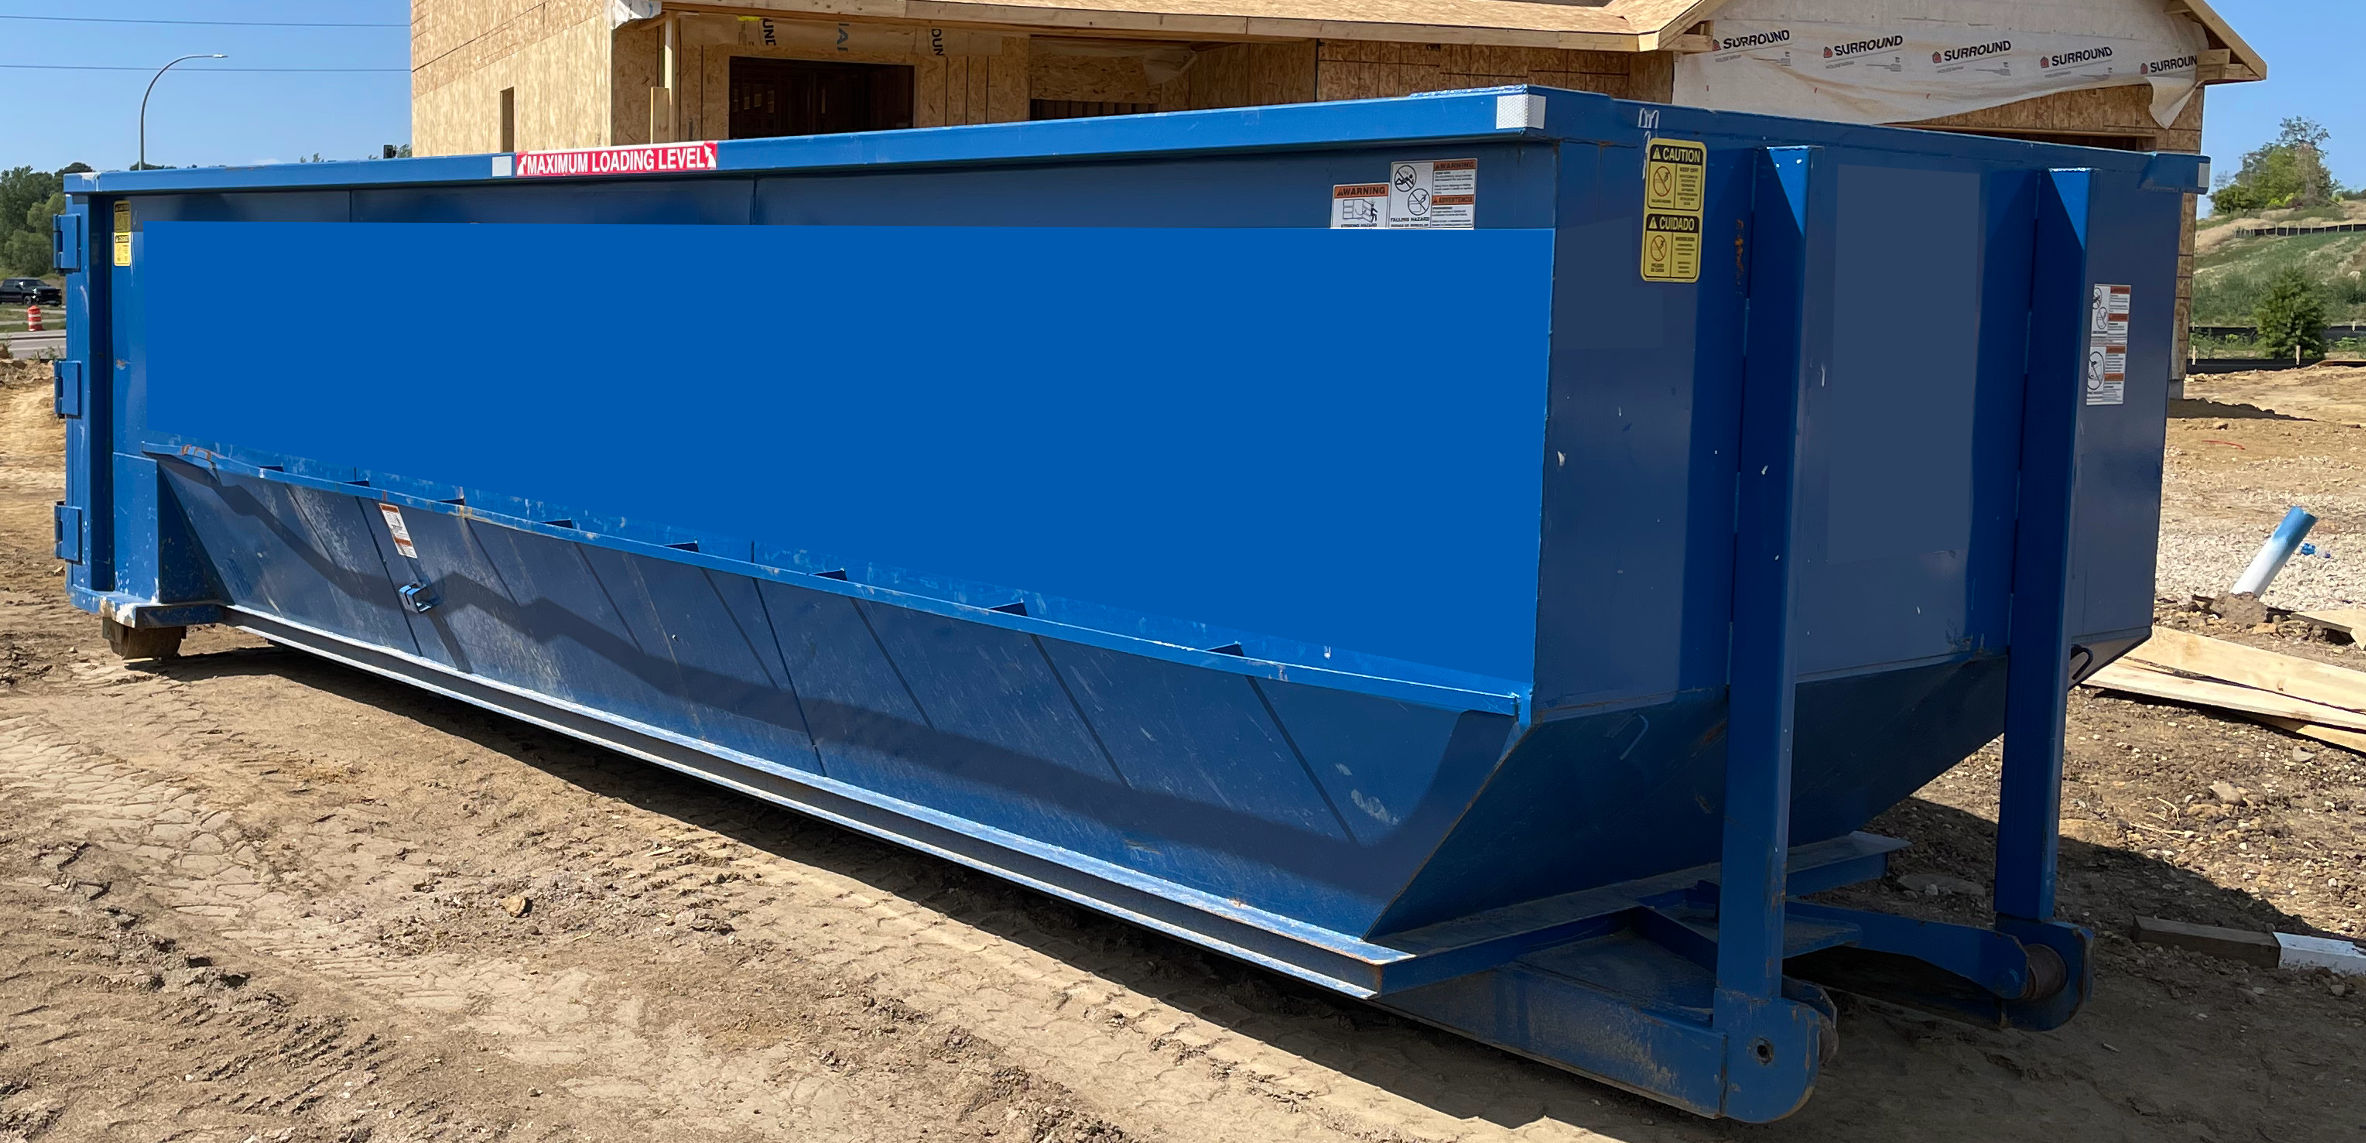 Blue dumpster being placed on the driveway of residential area